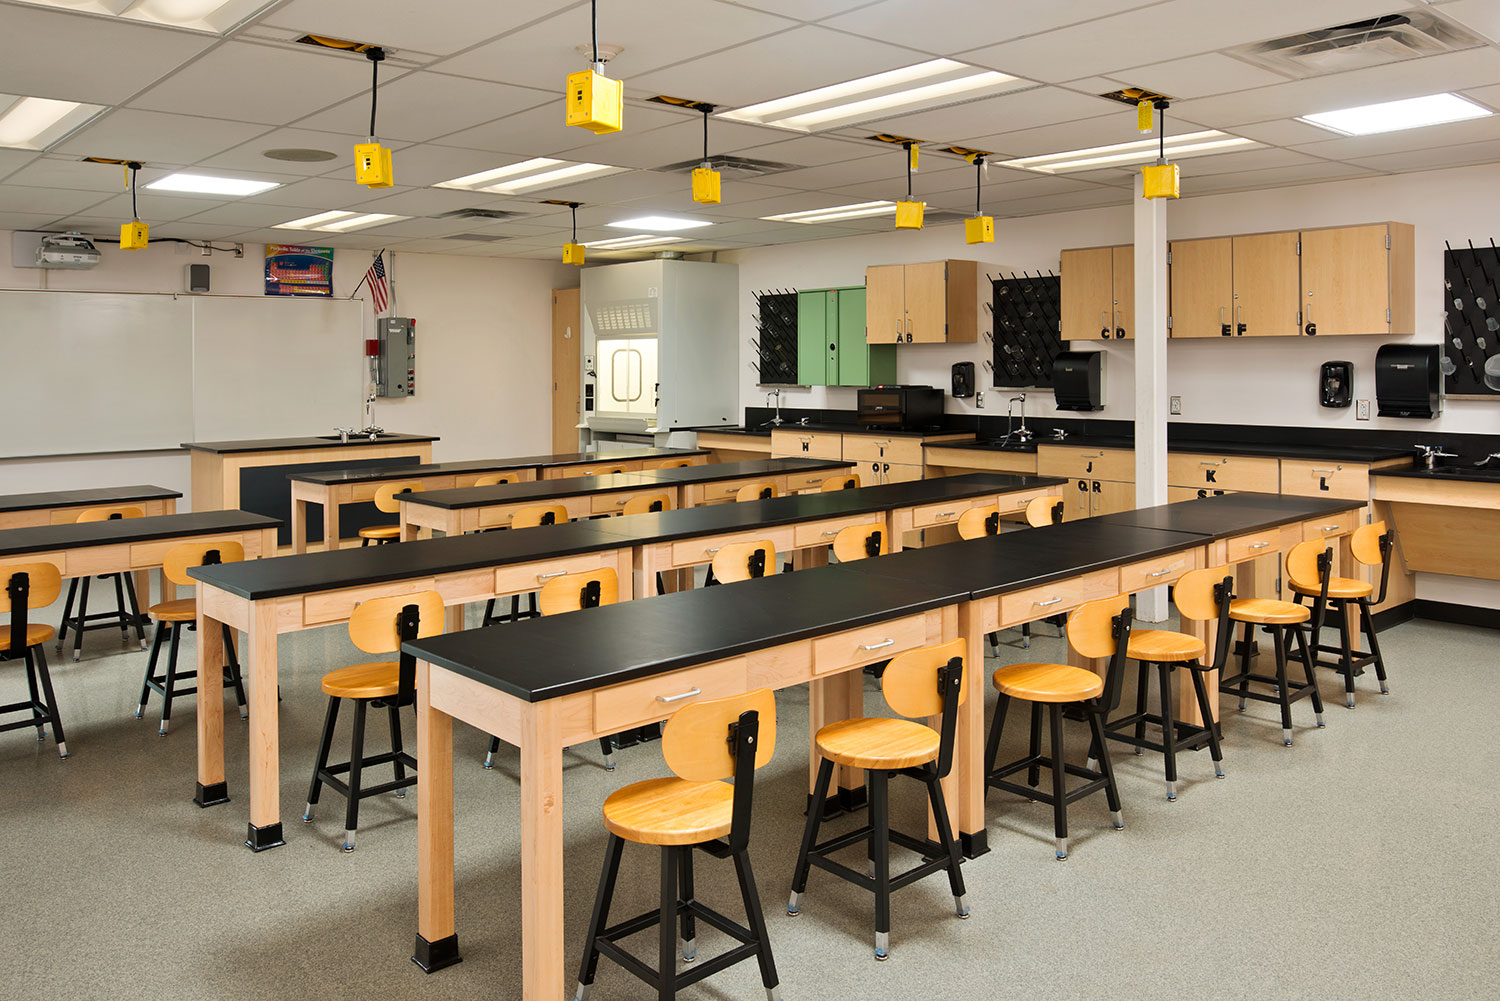 A 60,000-square-foot addition accommodates special education programs, classrooms, lab spaces, multi-purpose instructional rooms and multi-occupation spaces.